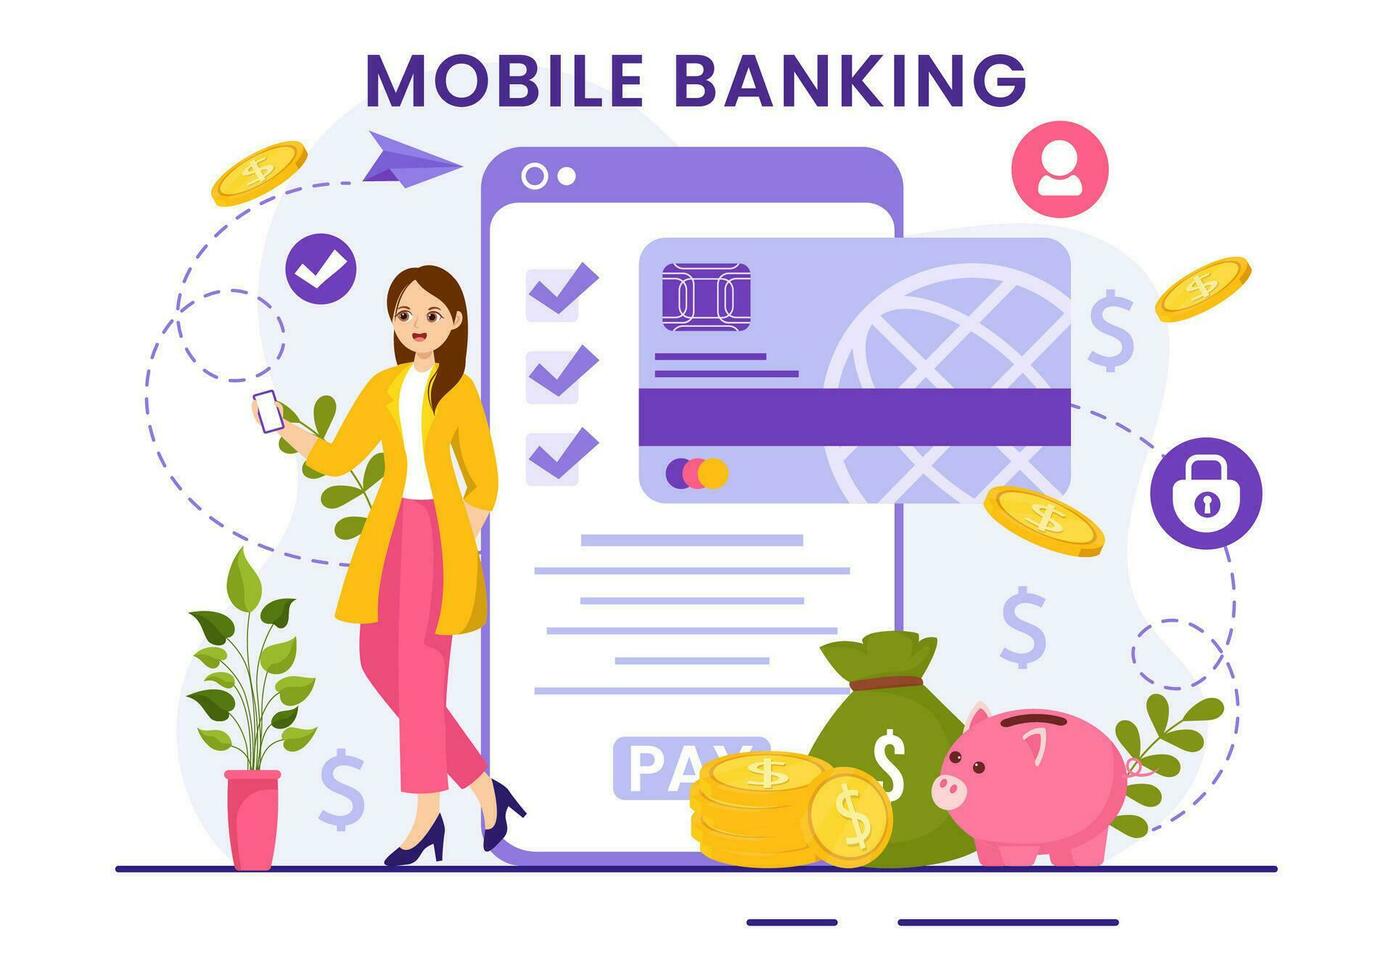 Mobile Banking Vector Illustration with Wallet App for Payment from Phone and Wireless Cash Transaction by Credit and Debit Cards in Flat Background